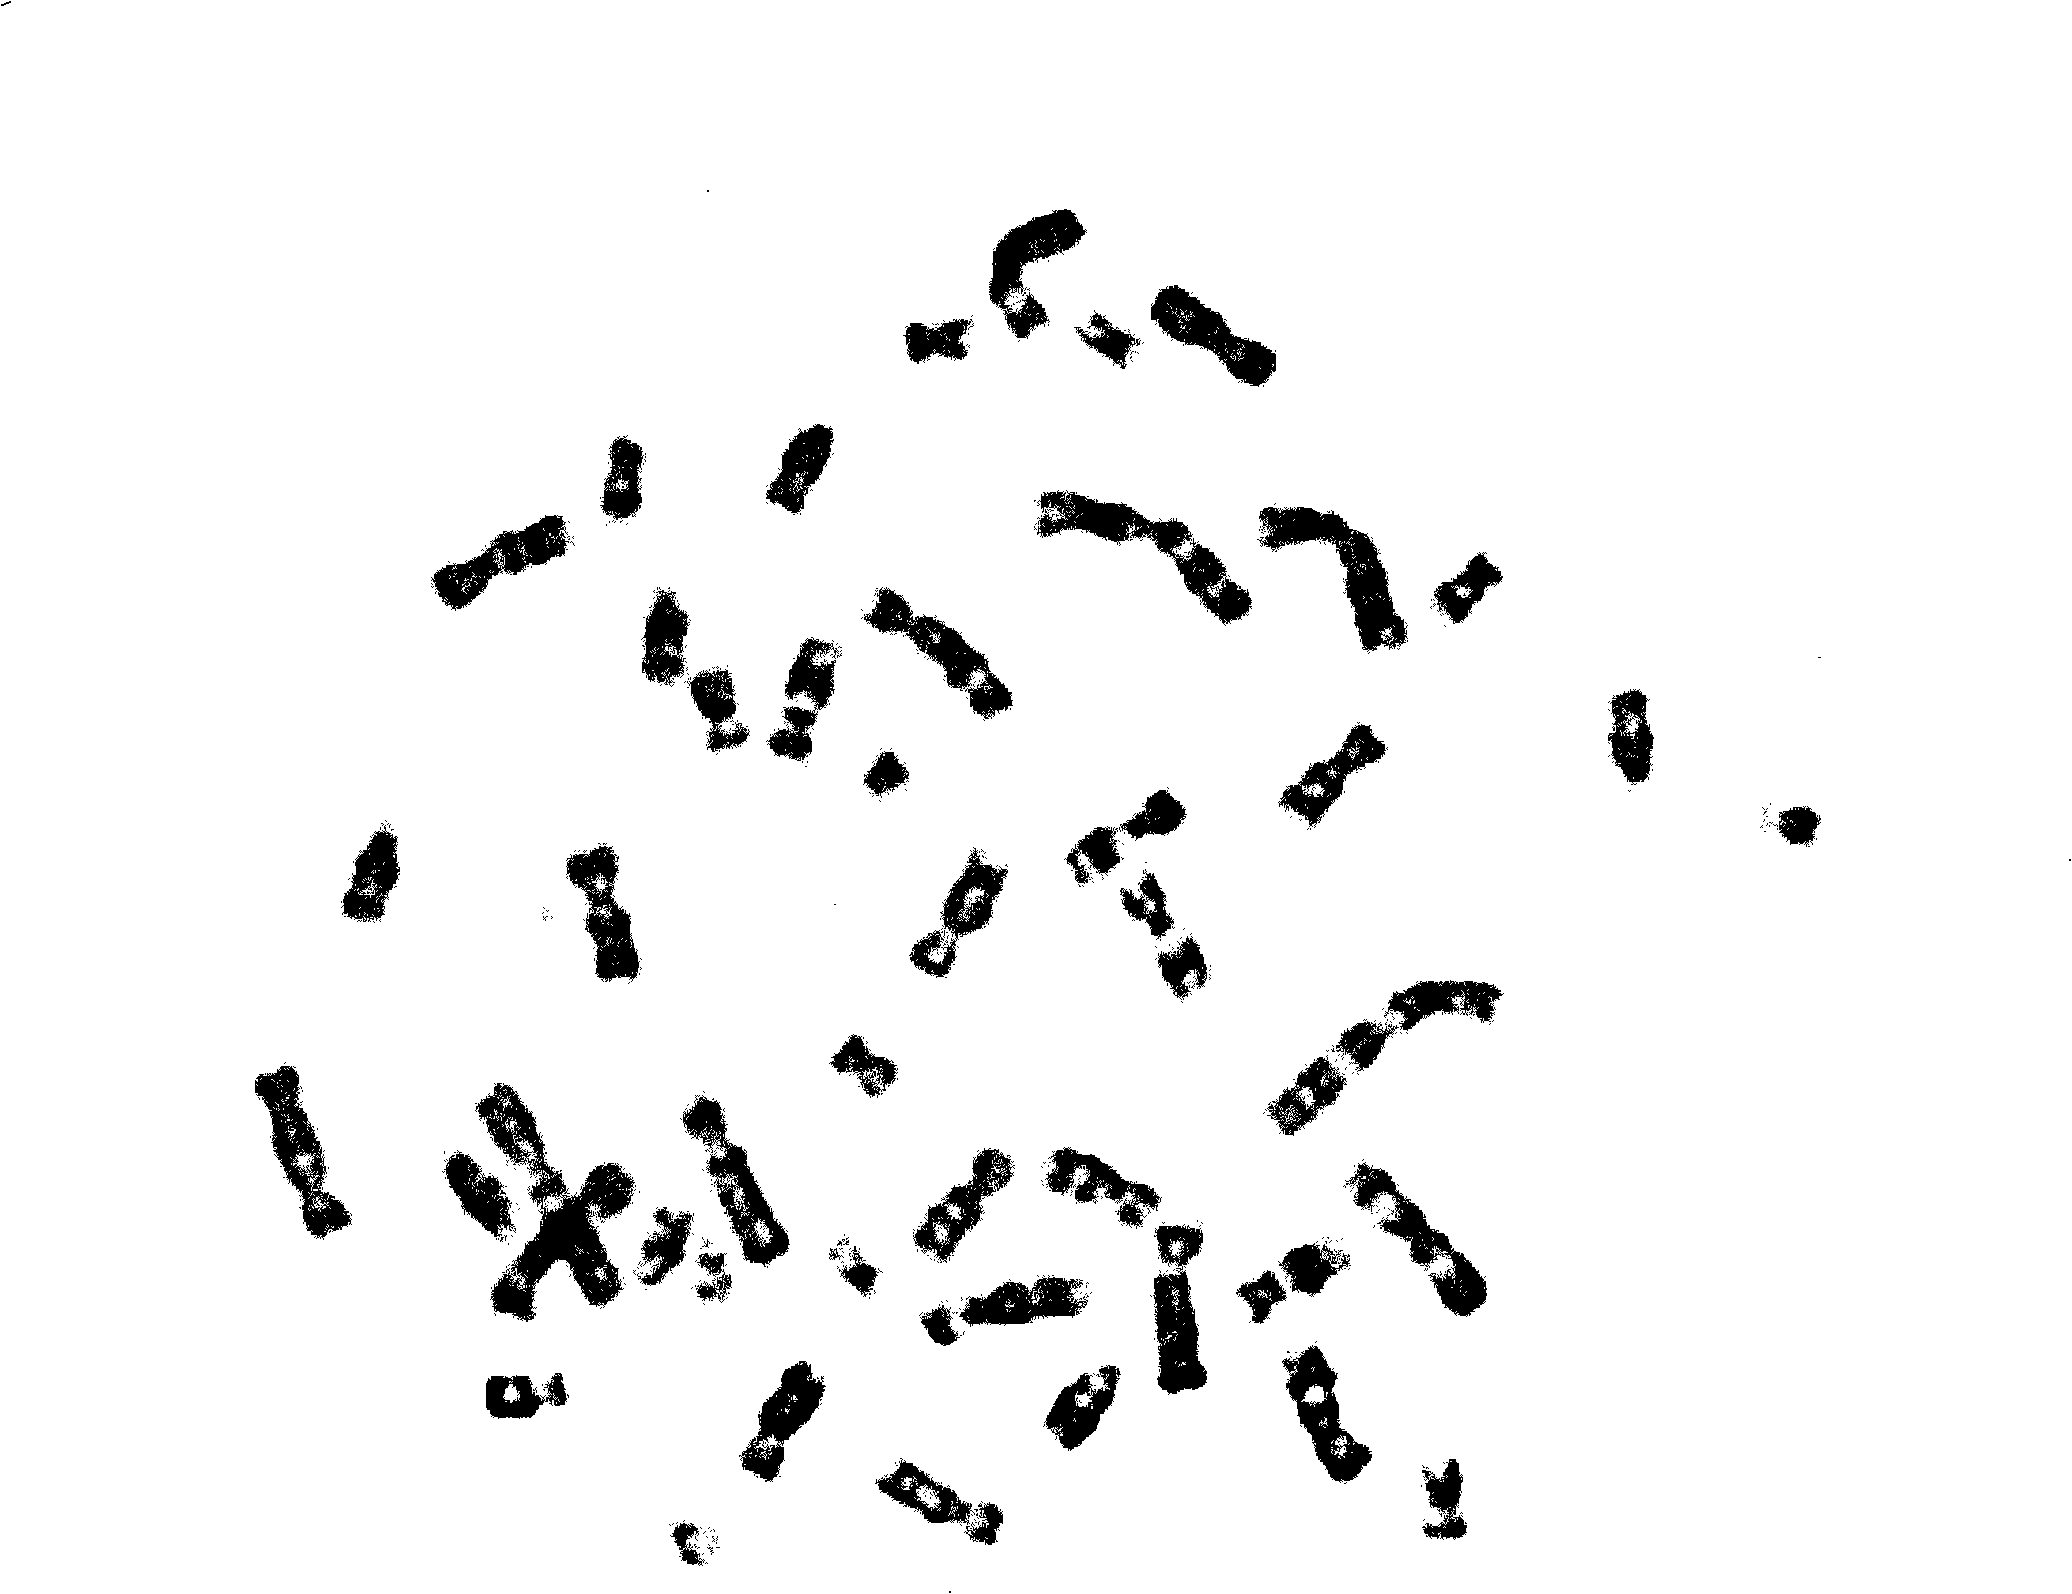 Automatic separating method for X type overlapping and adhering chromosome